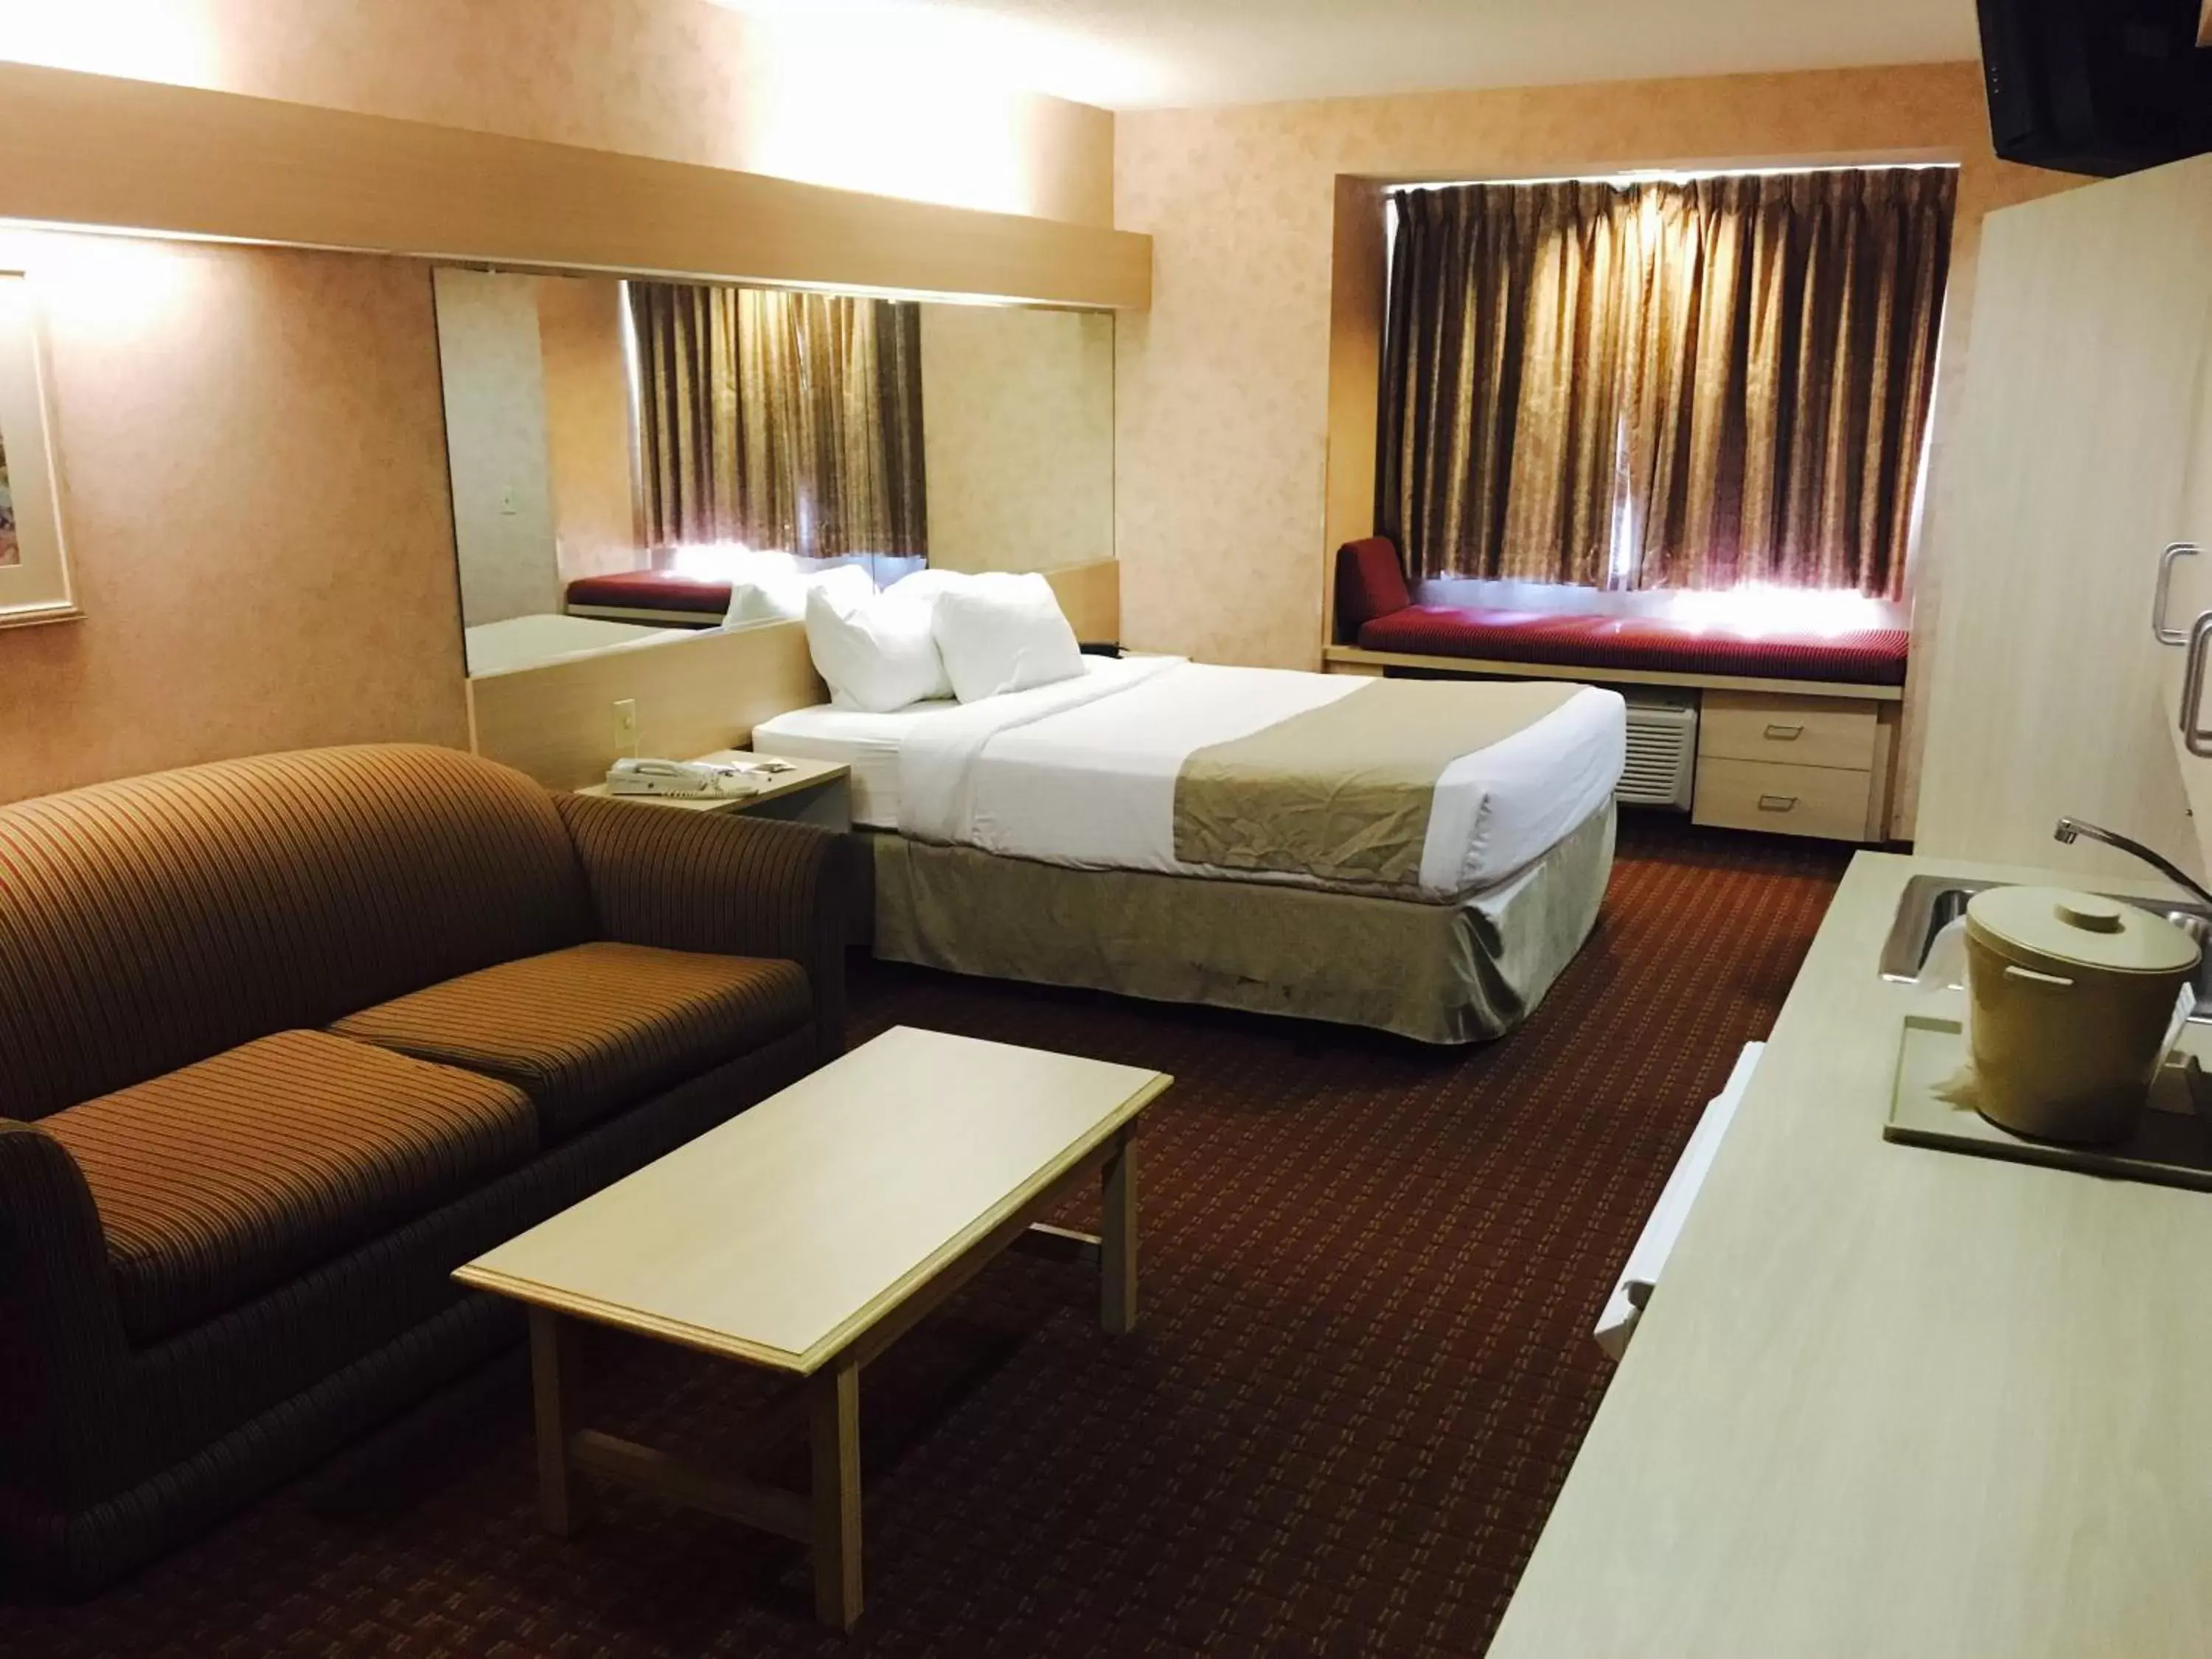 Other, Room Photo in Microtel Inn & Suites by Wyndham Syracuse Baldwinsville